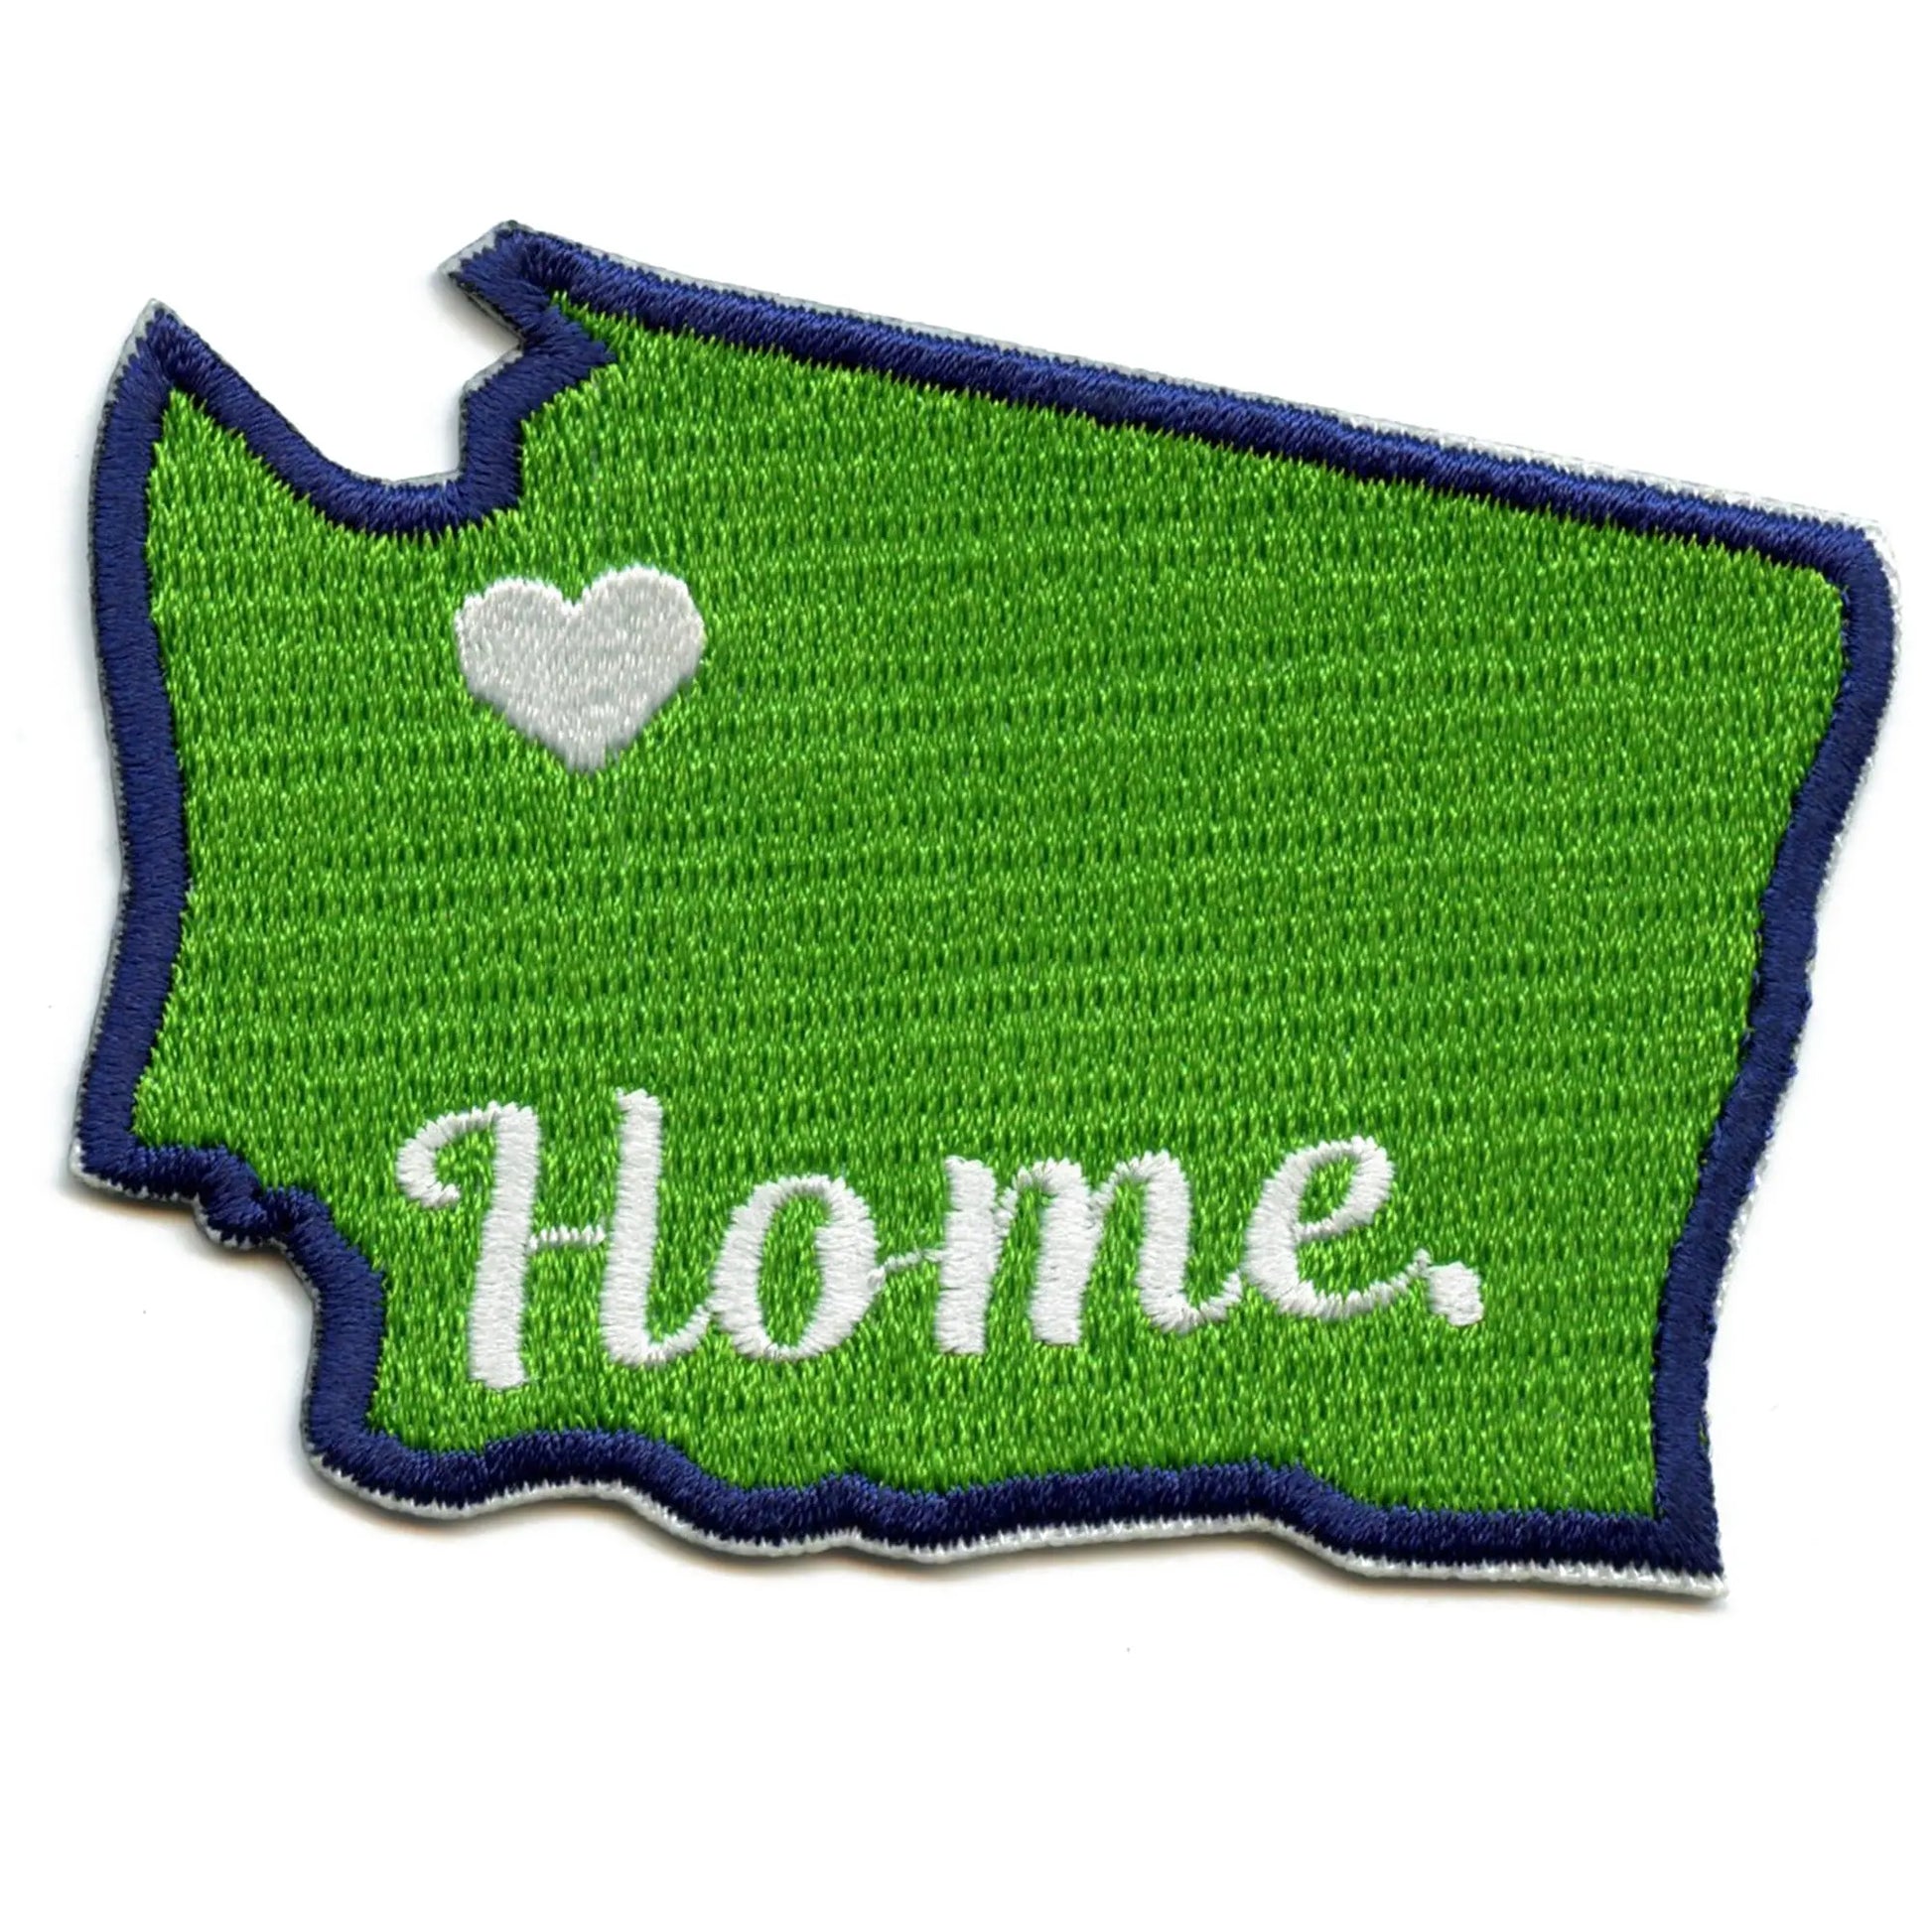 Washington Home State Patch Football Parody Embroidered Iron On - Navy/Green 